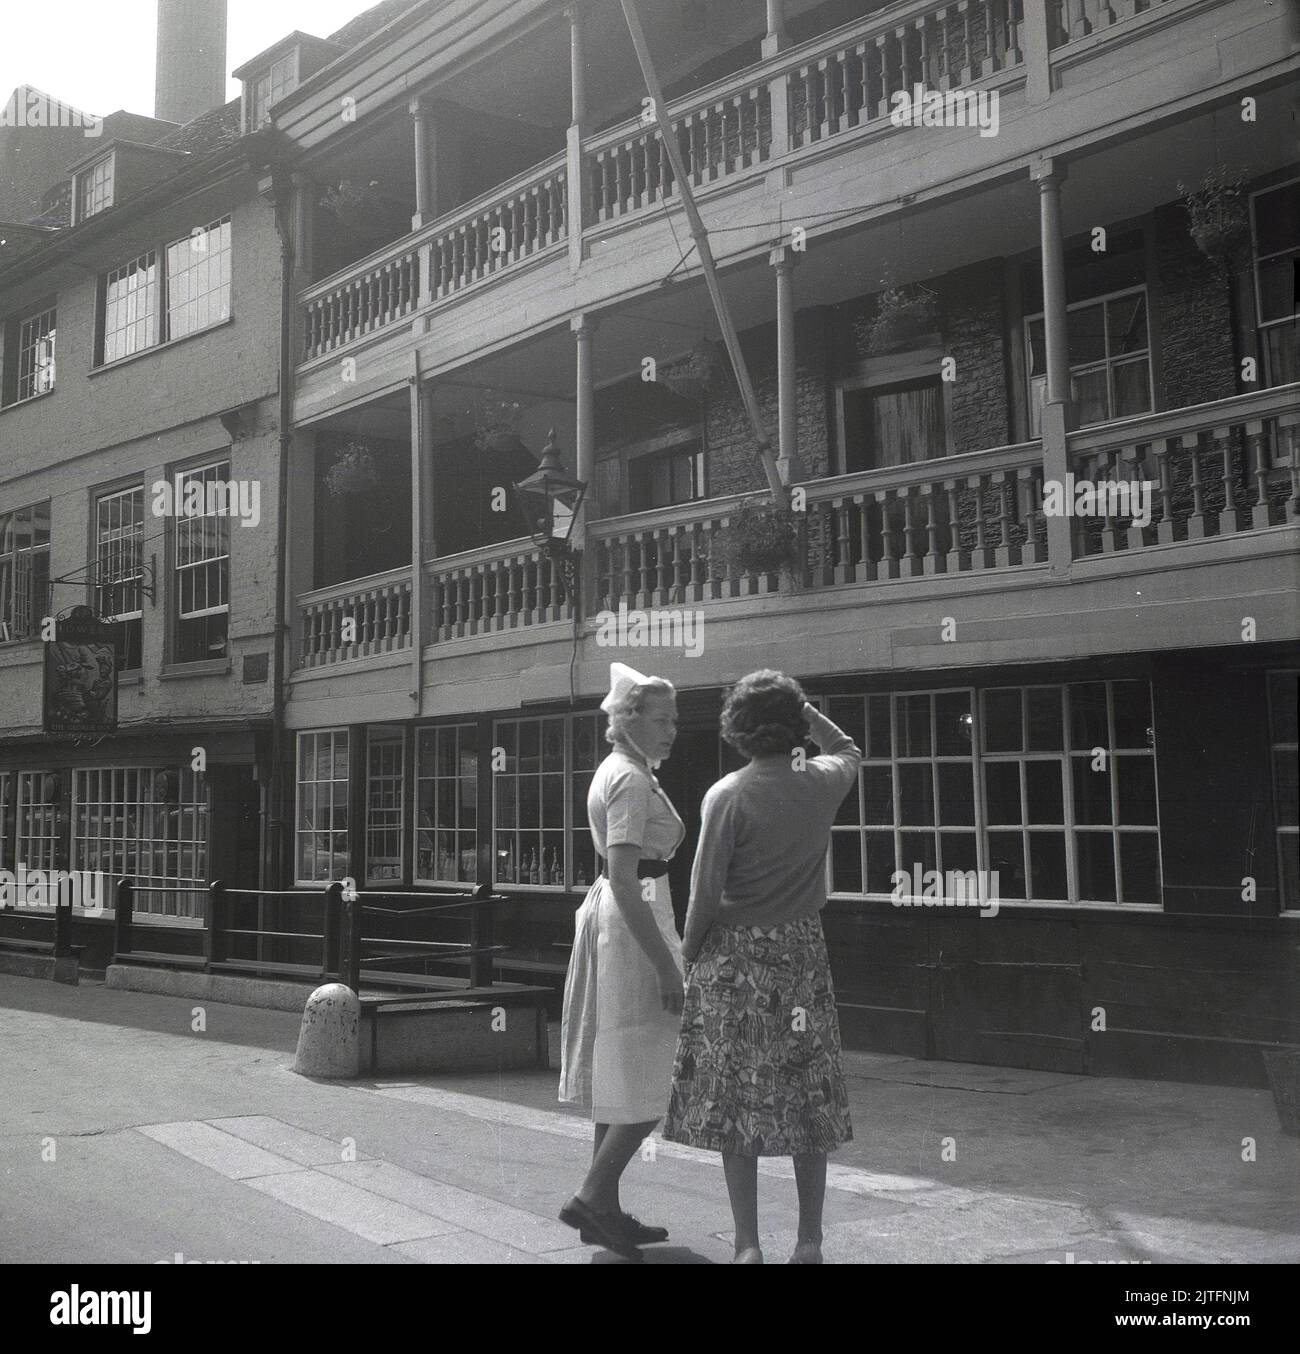 1963, historical, a lady and a nurse standing outside the historic tavern, the George Inn, located off Borough High Street in Southwark, London, England, UK. Guy's Hospital, a large NHS hospital is nearby. The famous public house, The George Inn is the only surviving galliered coaching inn in London. Stock Photo